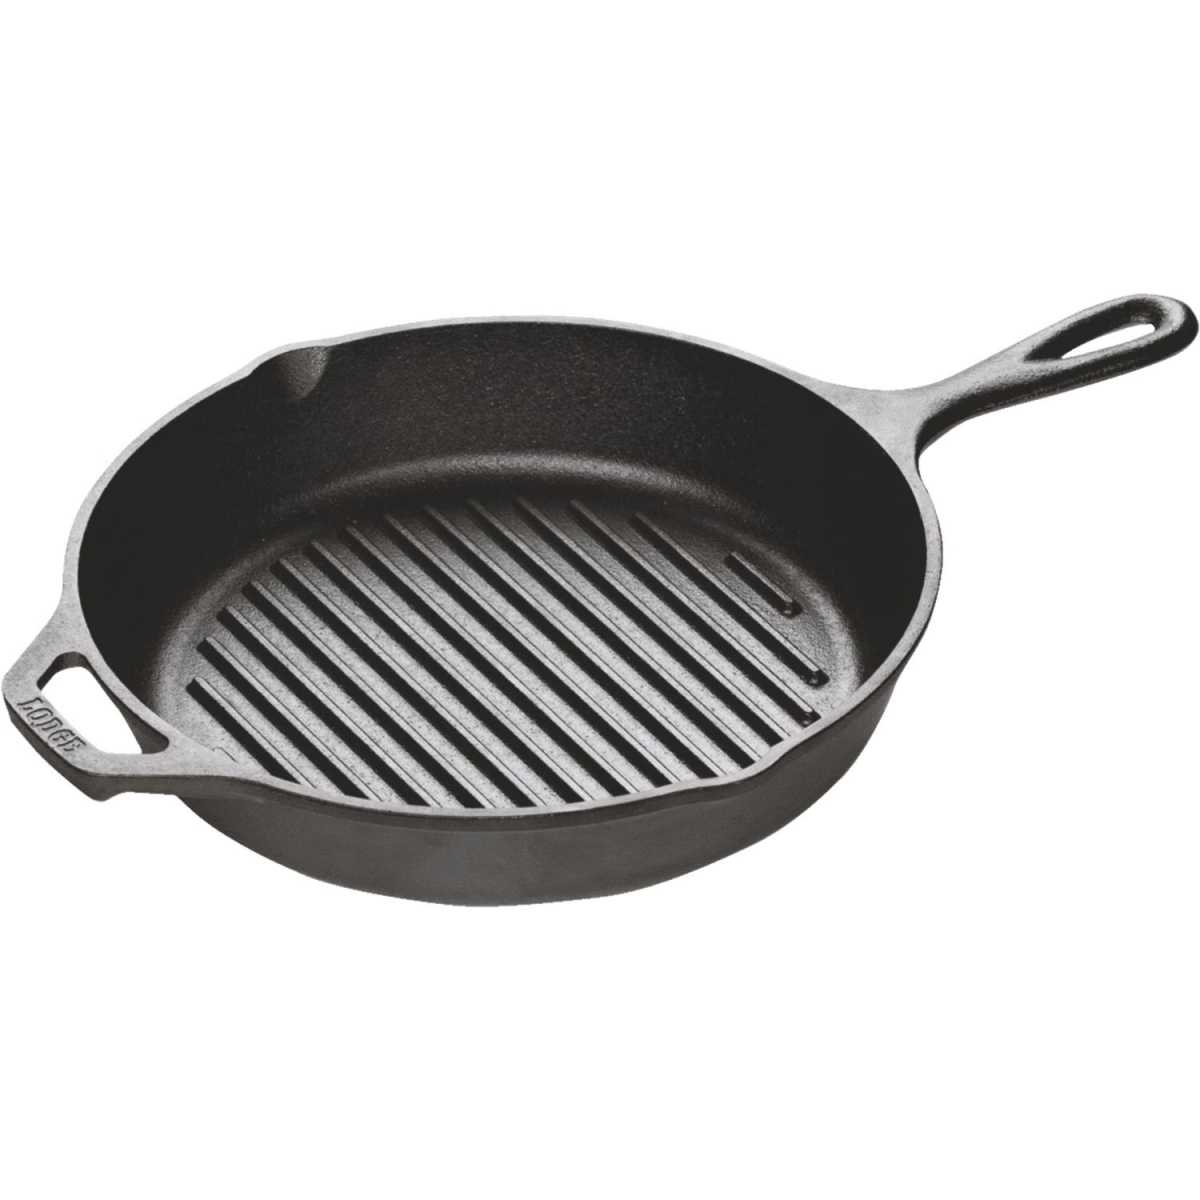 Picture of Lodge 1122977 10.25 in. Round Cast Iron Grill Pan